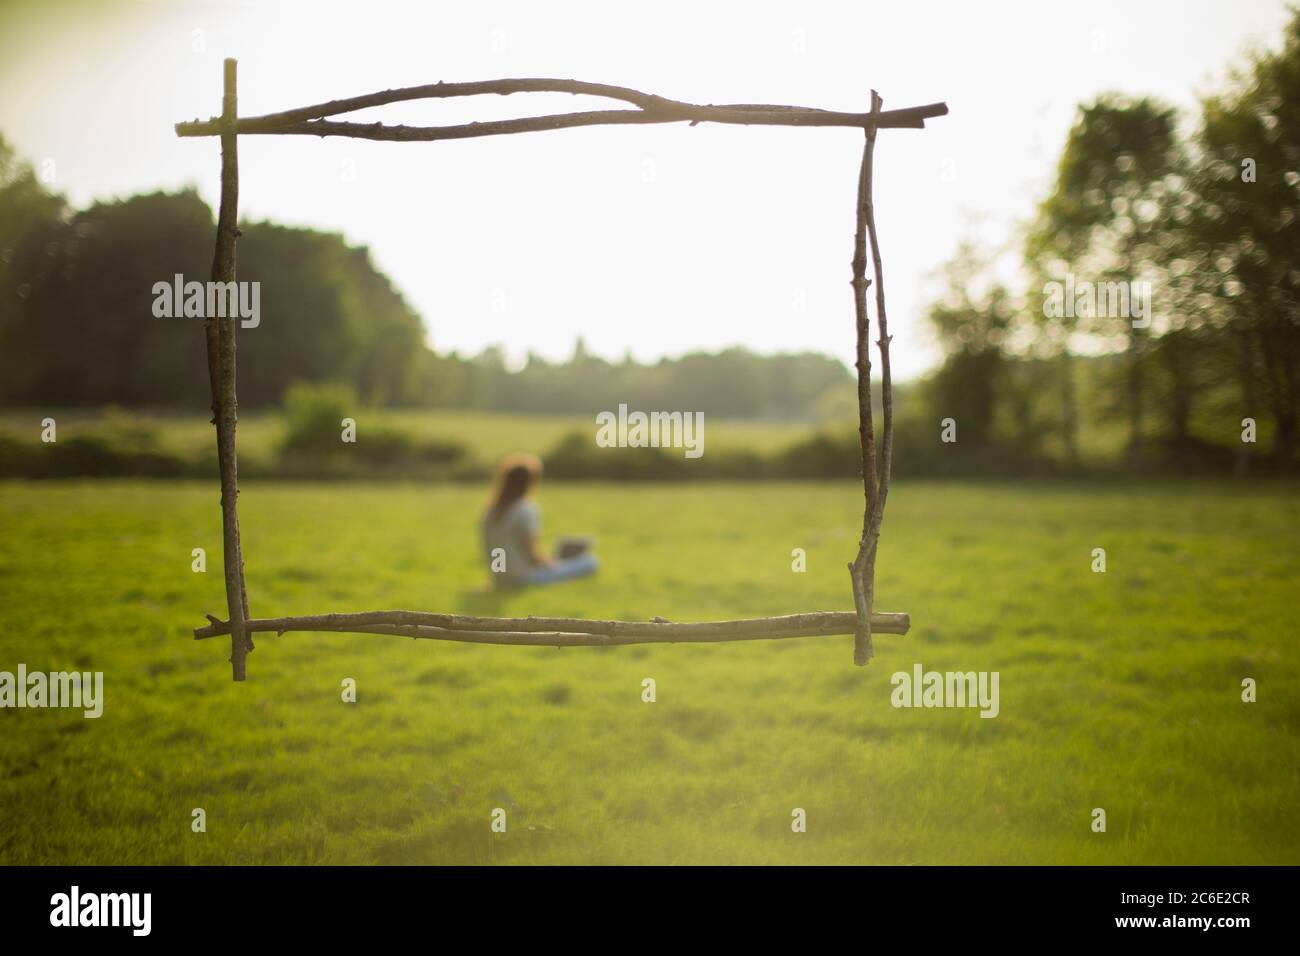 Branch frame over woman using laptop in idyllic grass field Stock Photo